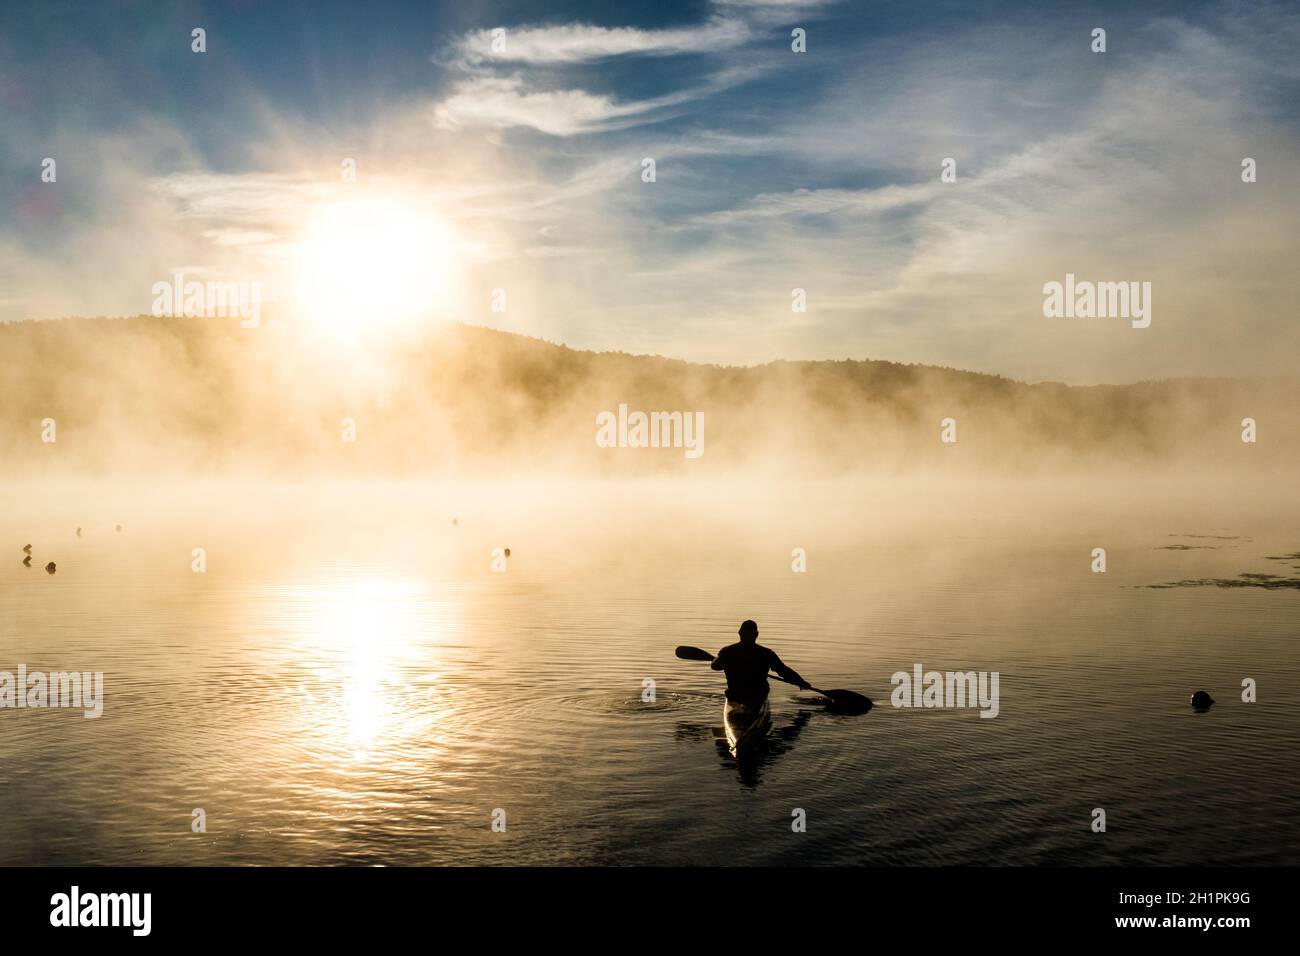 Kayakers silhouetted by the rising sun on Lake Iroquois in Vermont,  USA, New England, on a misty September morning. Stock Photo